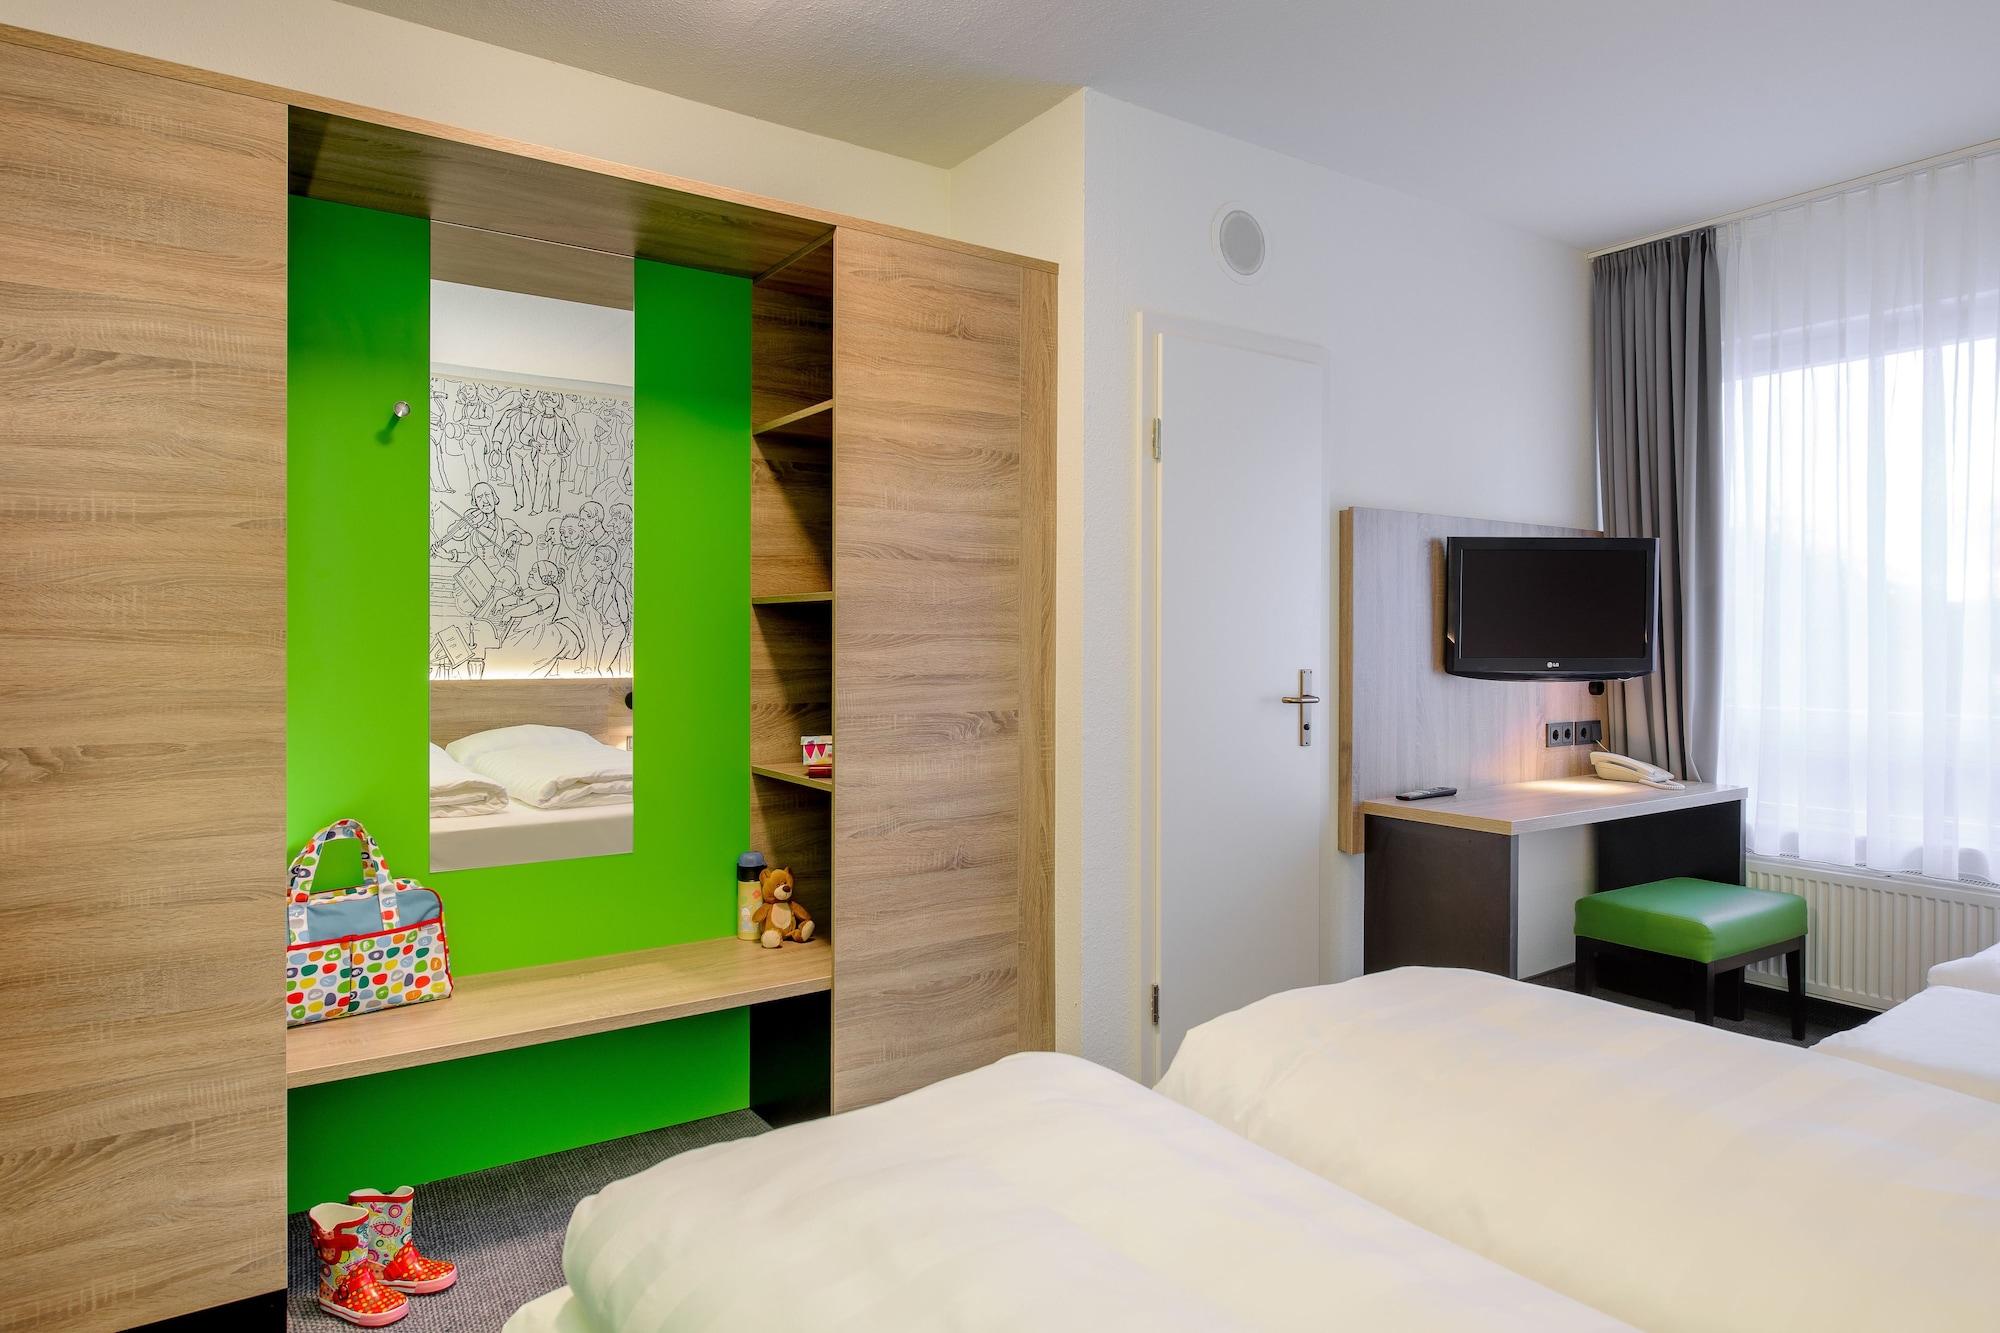 Ibis Styles Halle in Halle, Germany